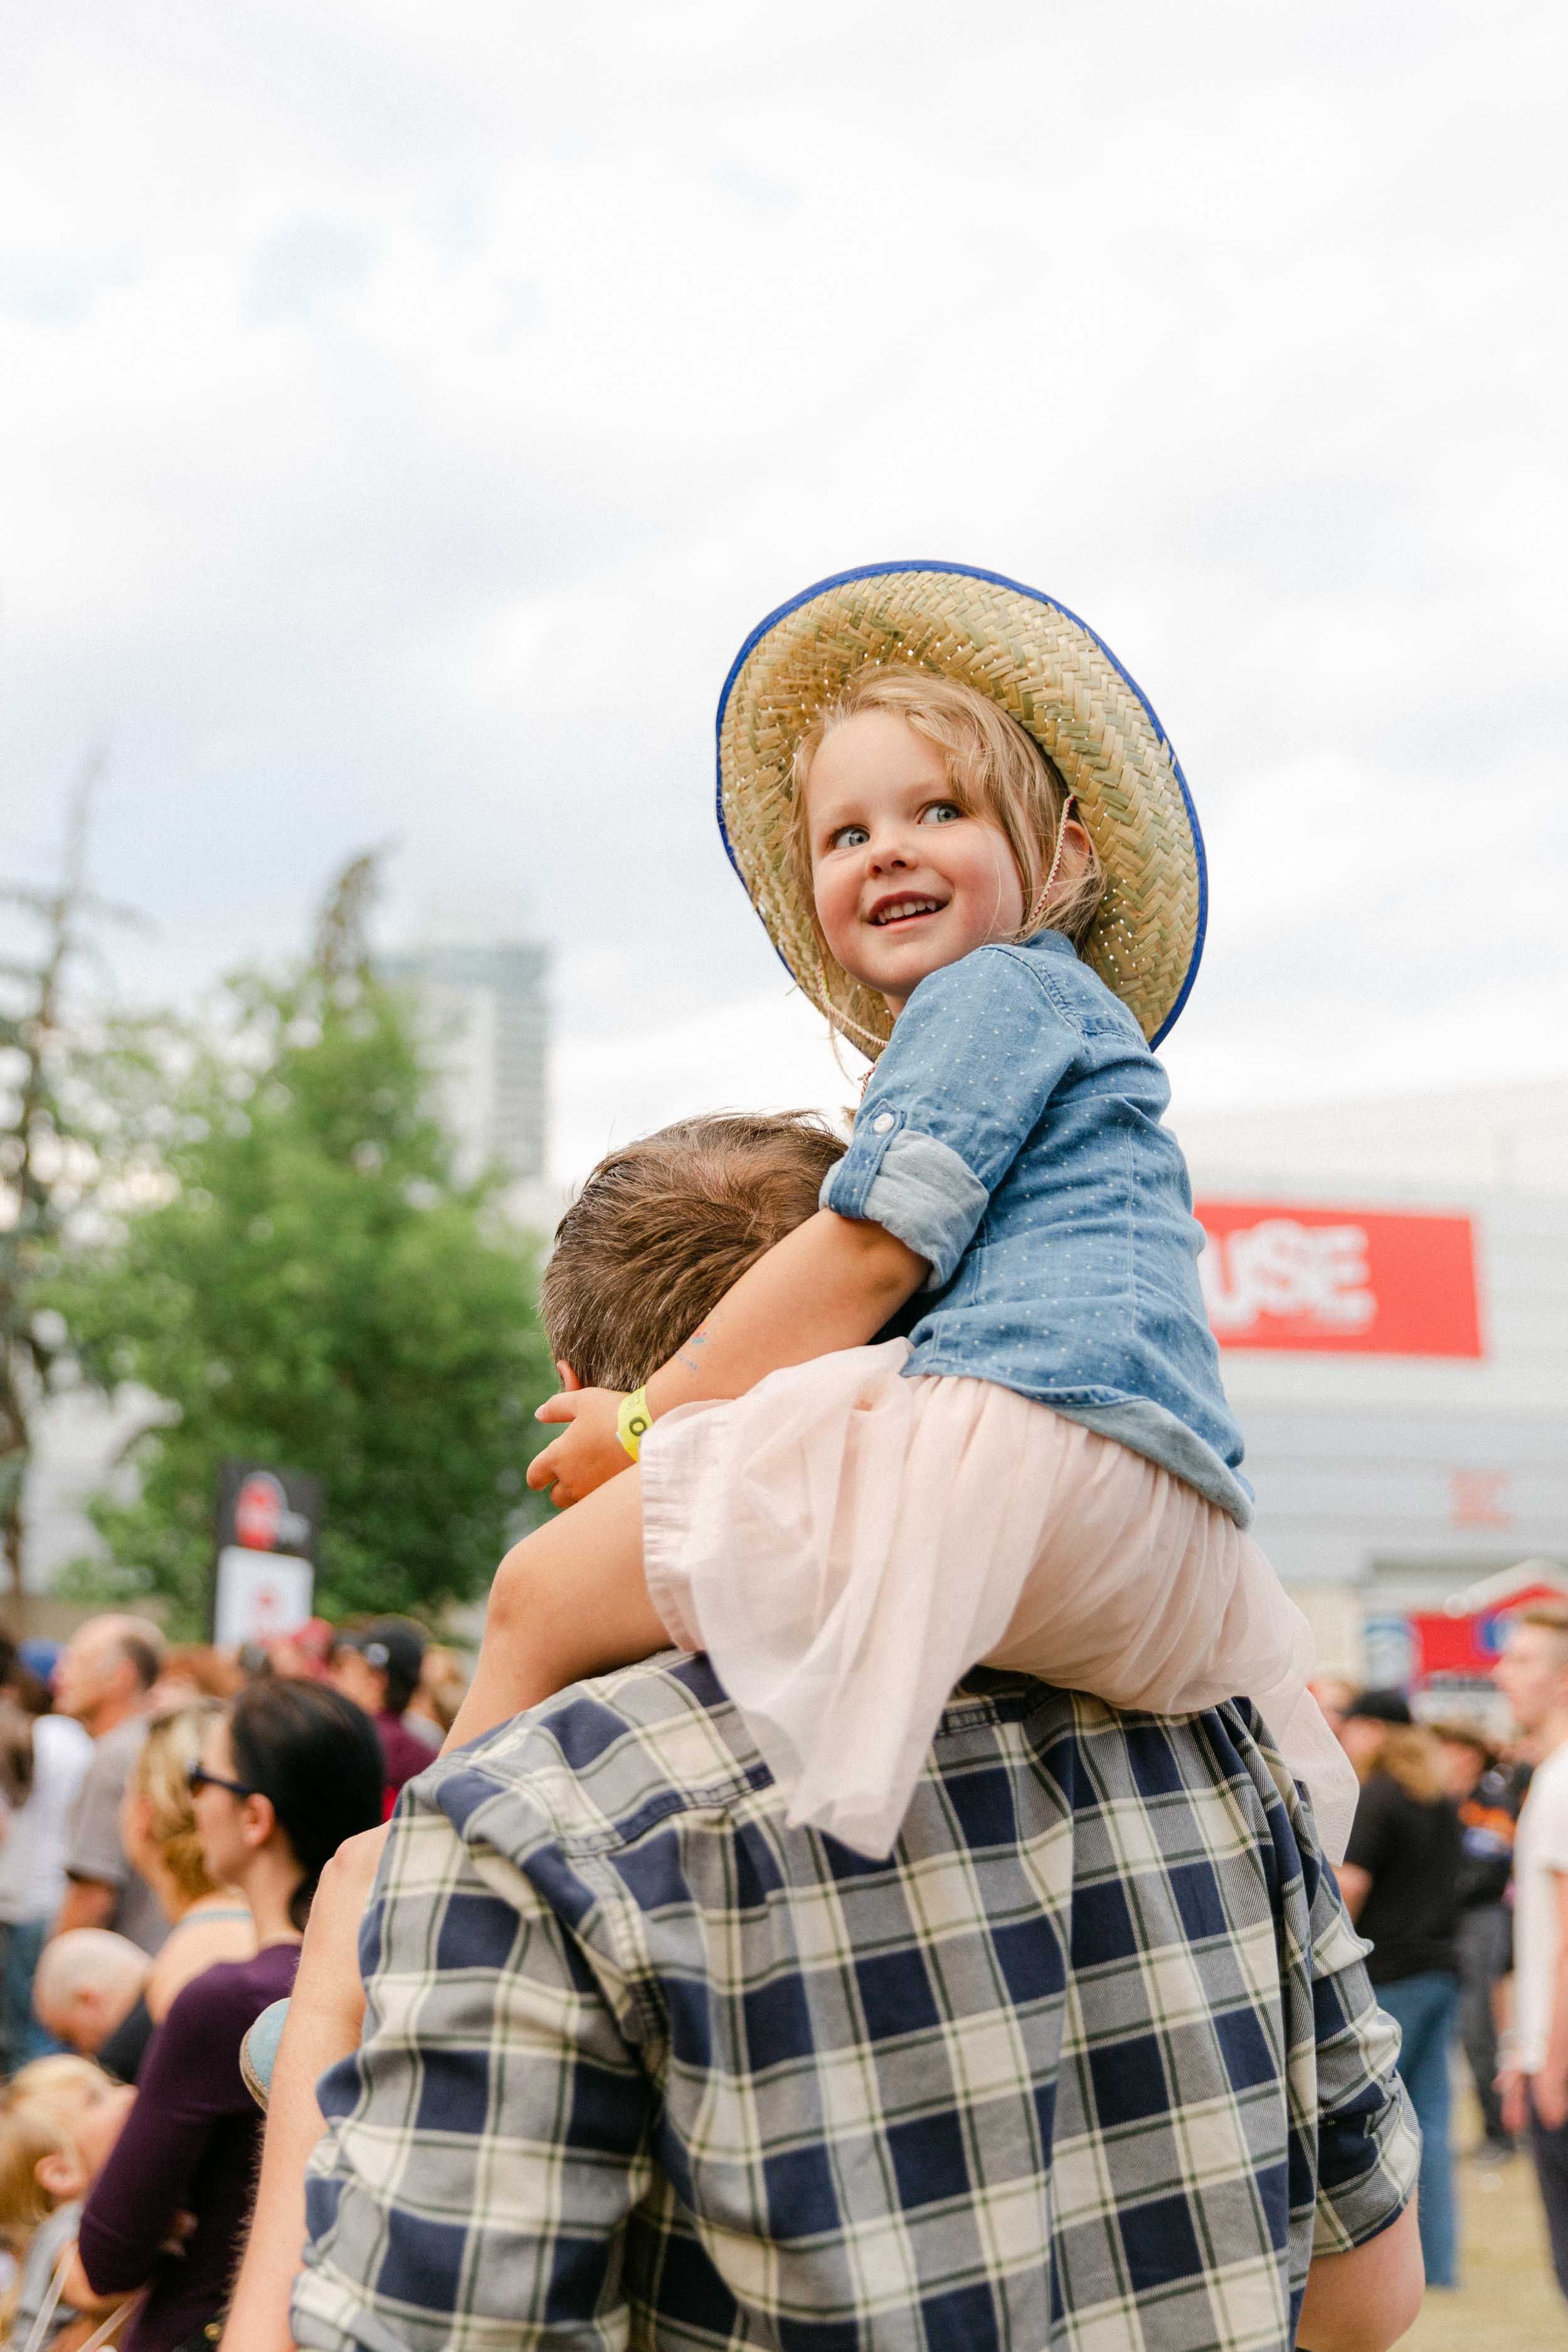 Family Shows Calgary Stampede 10 Best Place to Take Instagrammable Photos